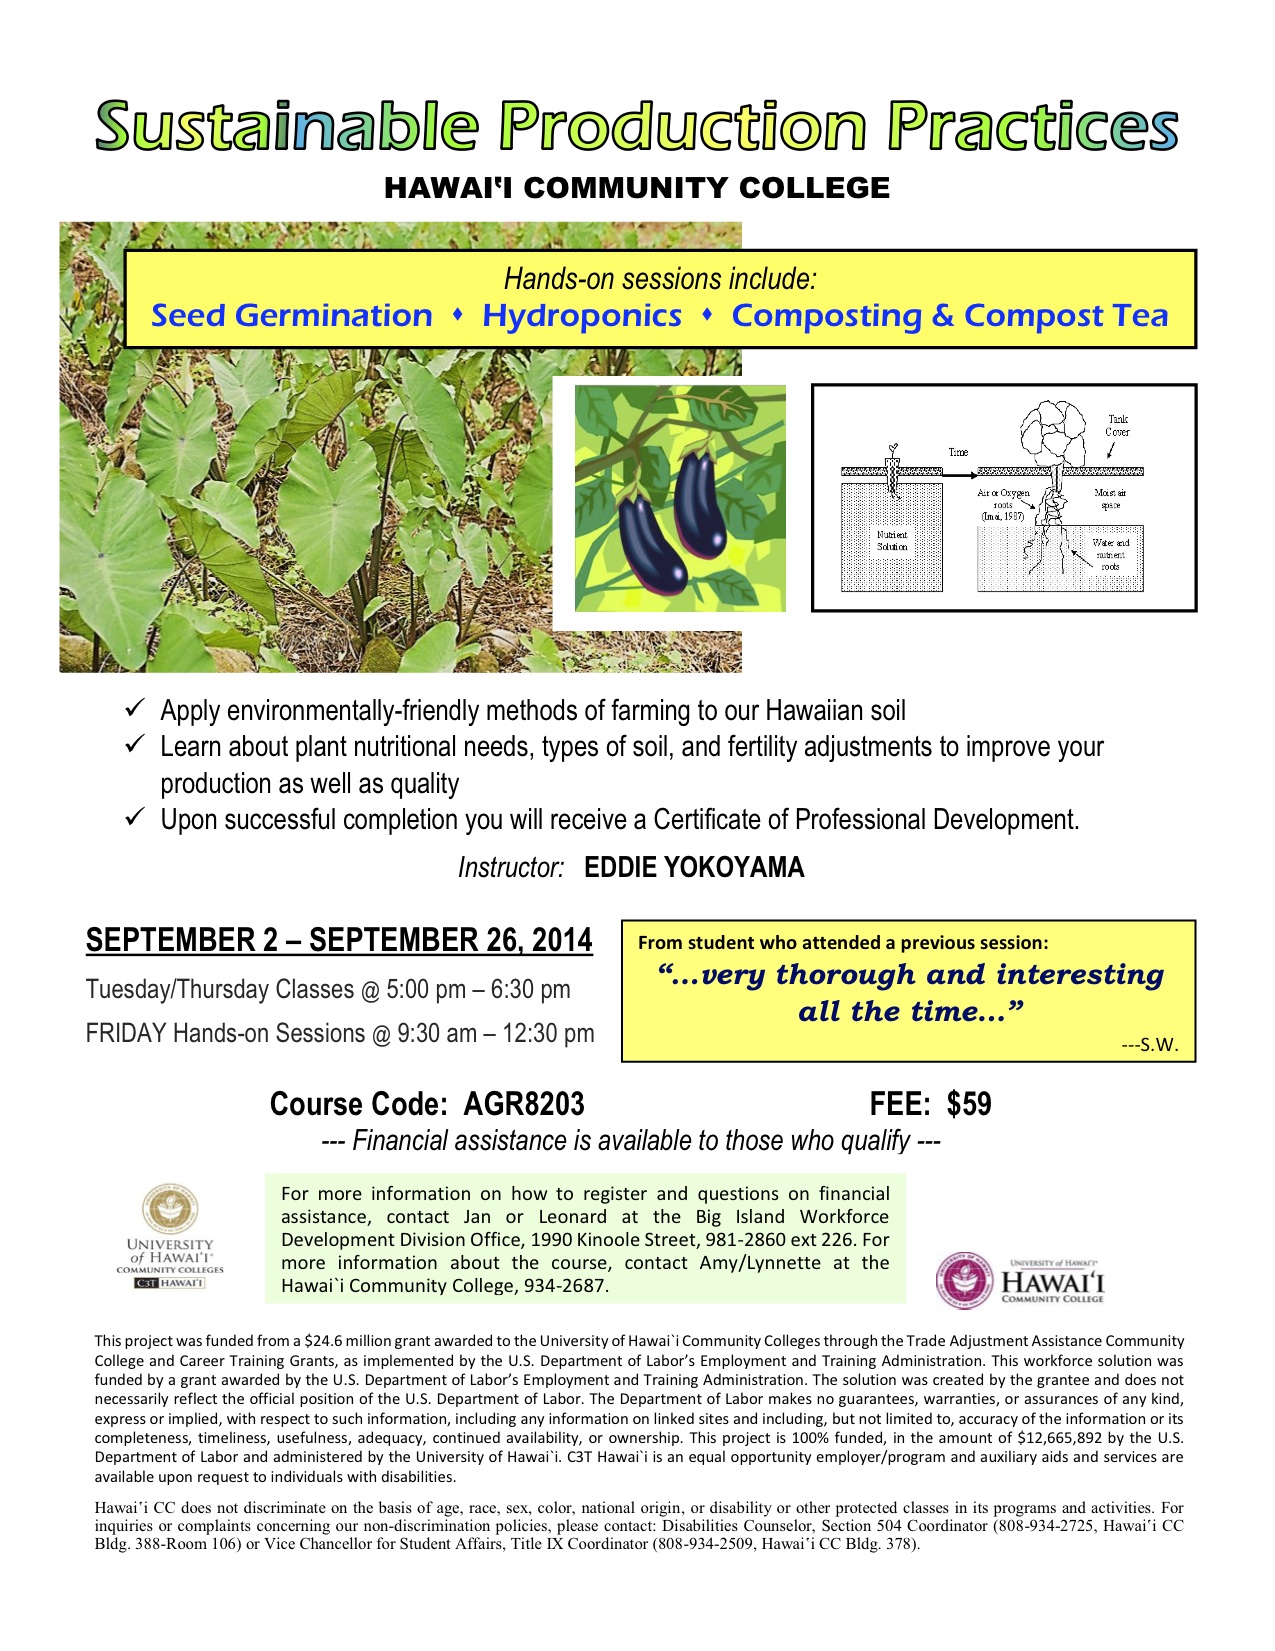 September HCC Course: Sustainable Production Practices